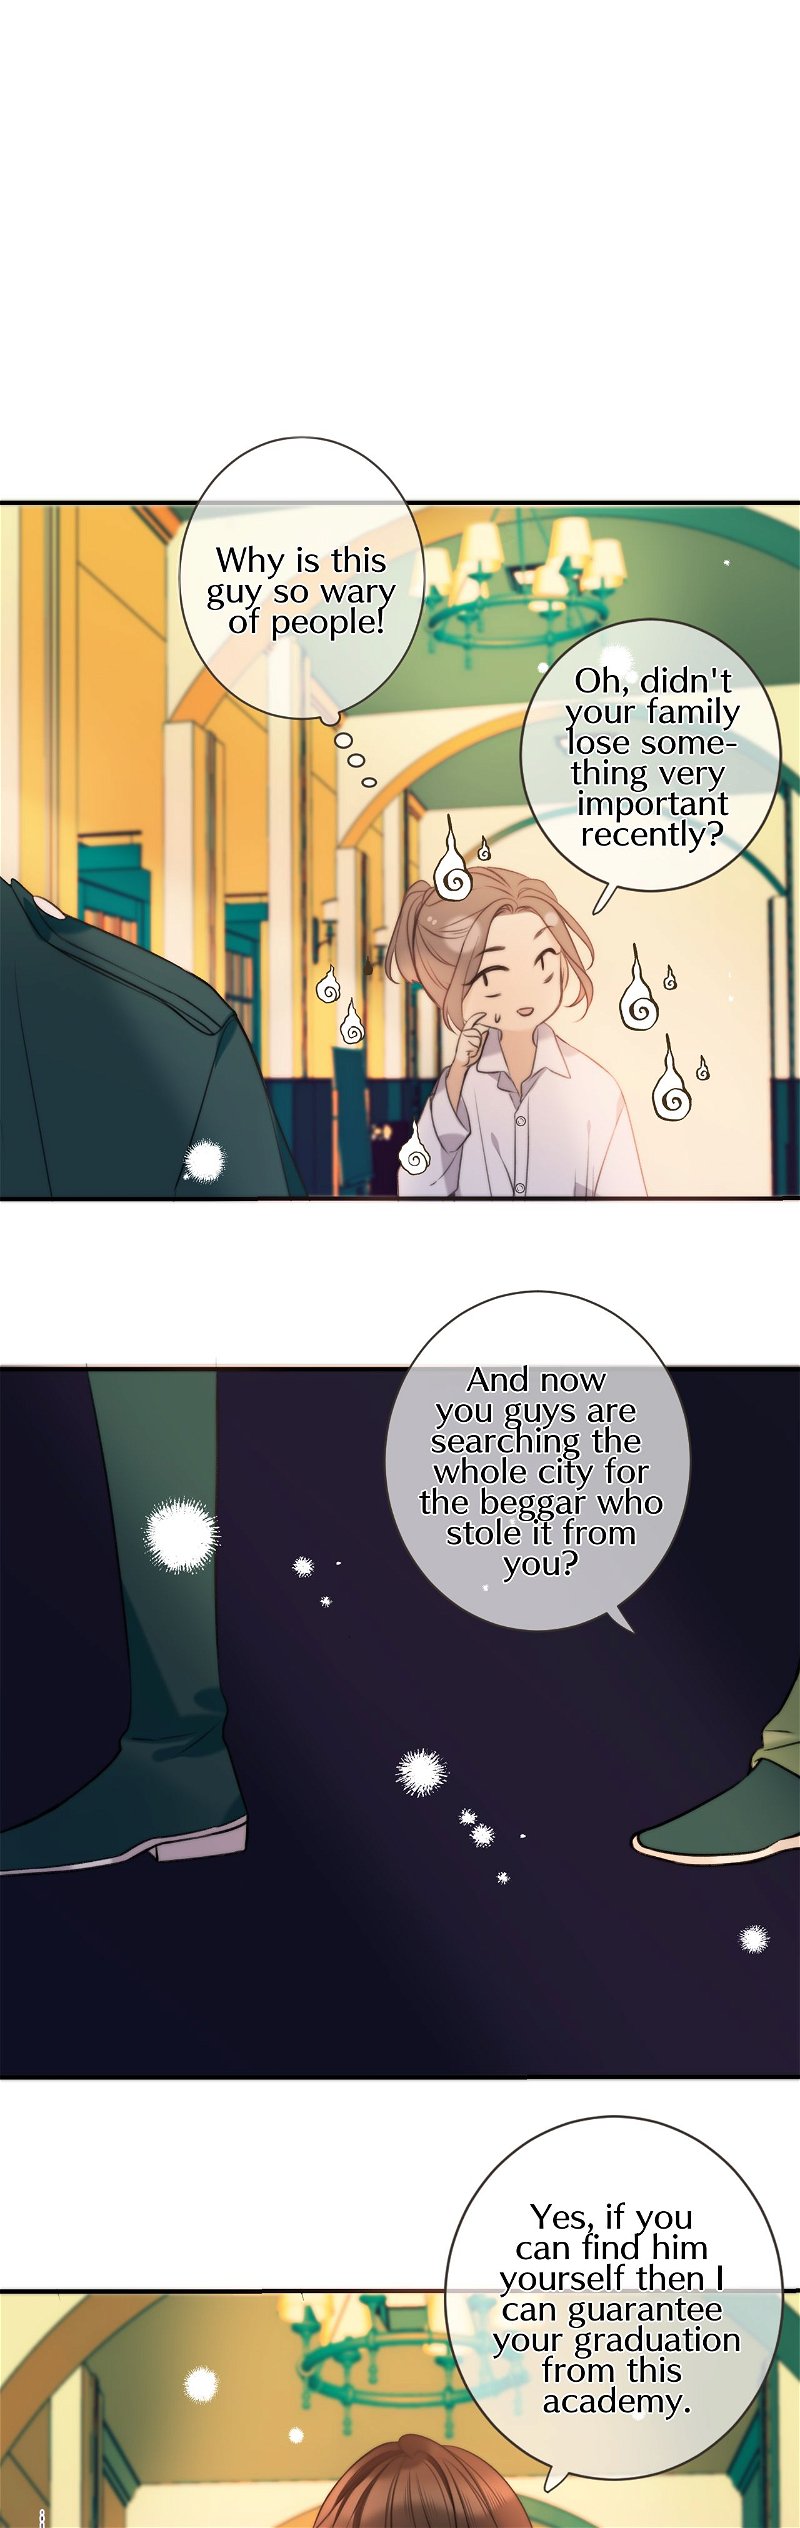 We Meet Again, Miss Lou Chapter 4 - Page 18